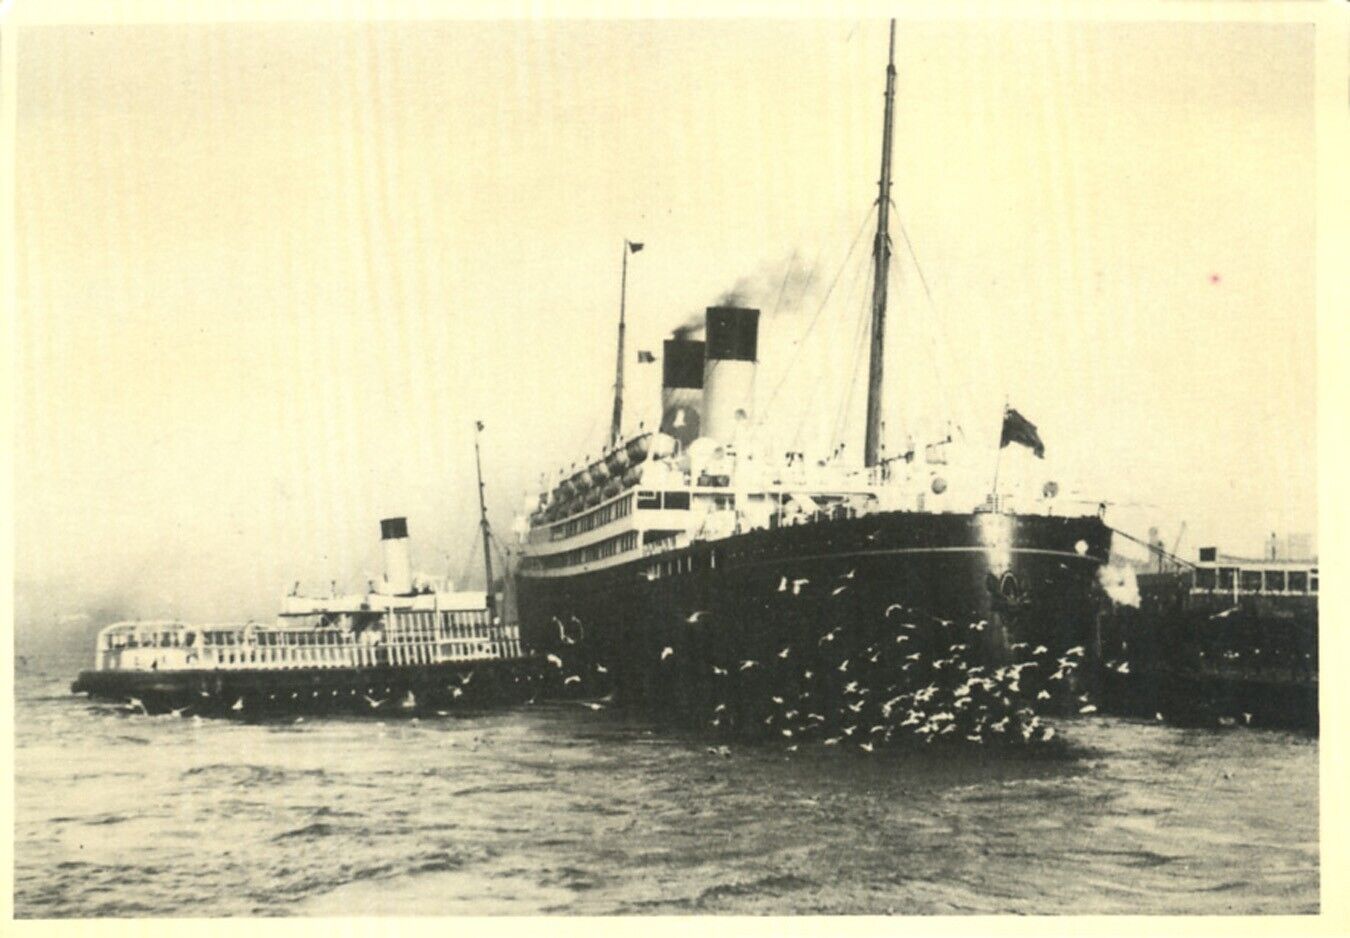 SS Laurentic Shipping in the Mersey 1930s Liverpool England Reprint Postcard